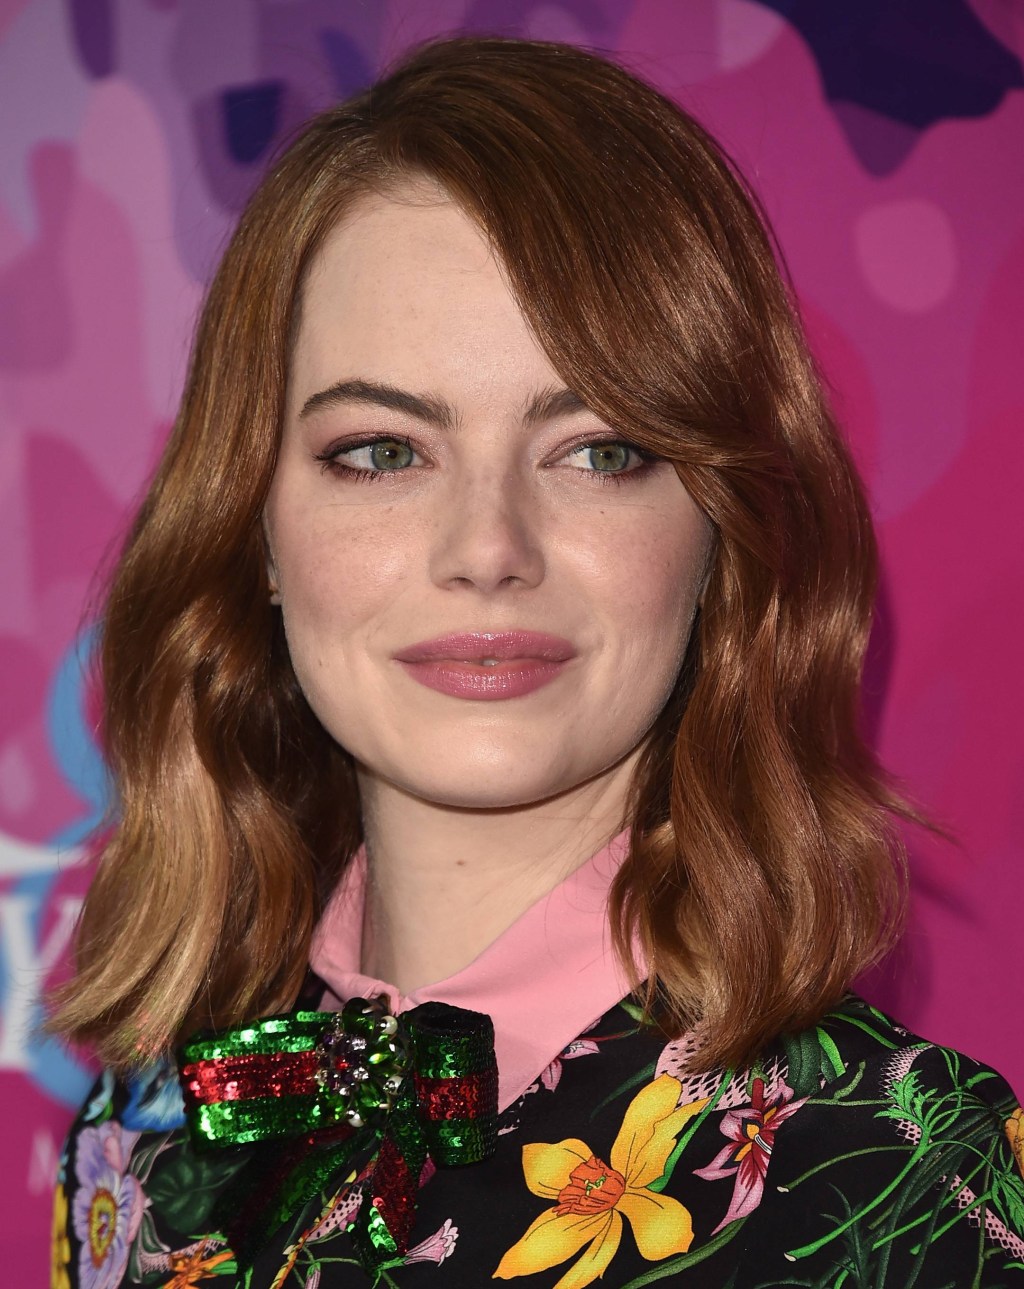 WEST HOLLYWOOD, CA - NOVEMBER 17:  Actress Emma Stone attends the 2nd Annual StyleMaker Awards hostd by Variety and WWD at Quixote Studios West Hollywood on November 17, 2016 in West Hollywood, California.  (Photo by Alberto E. Rodriguez/Getty Images)